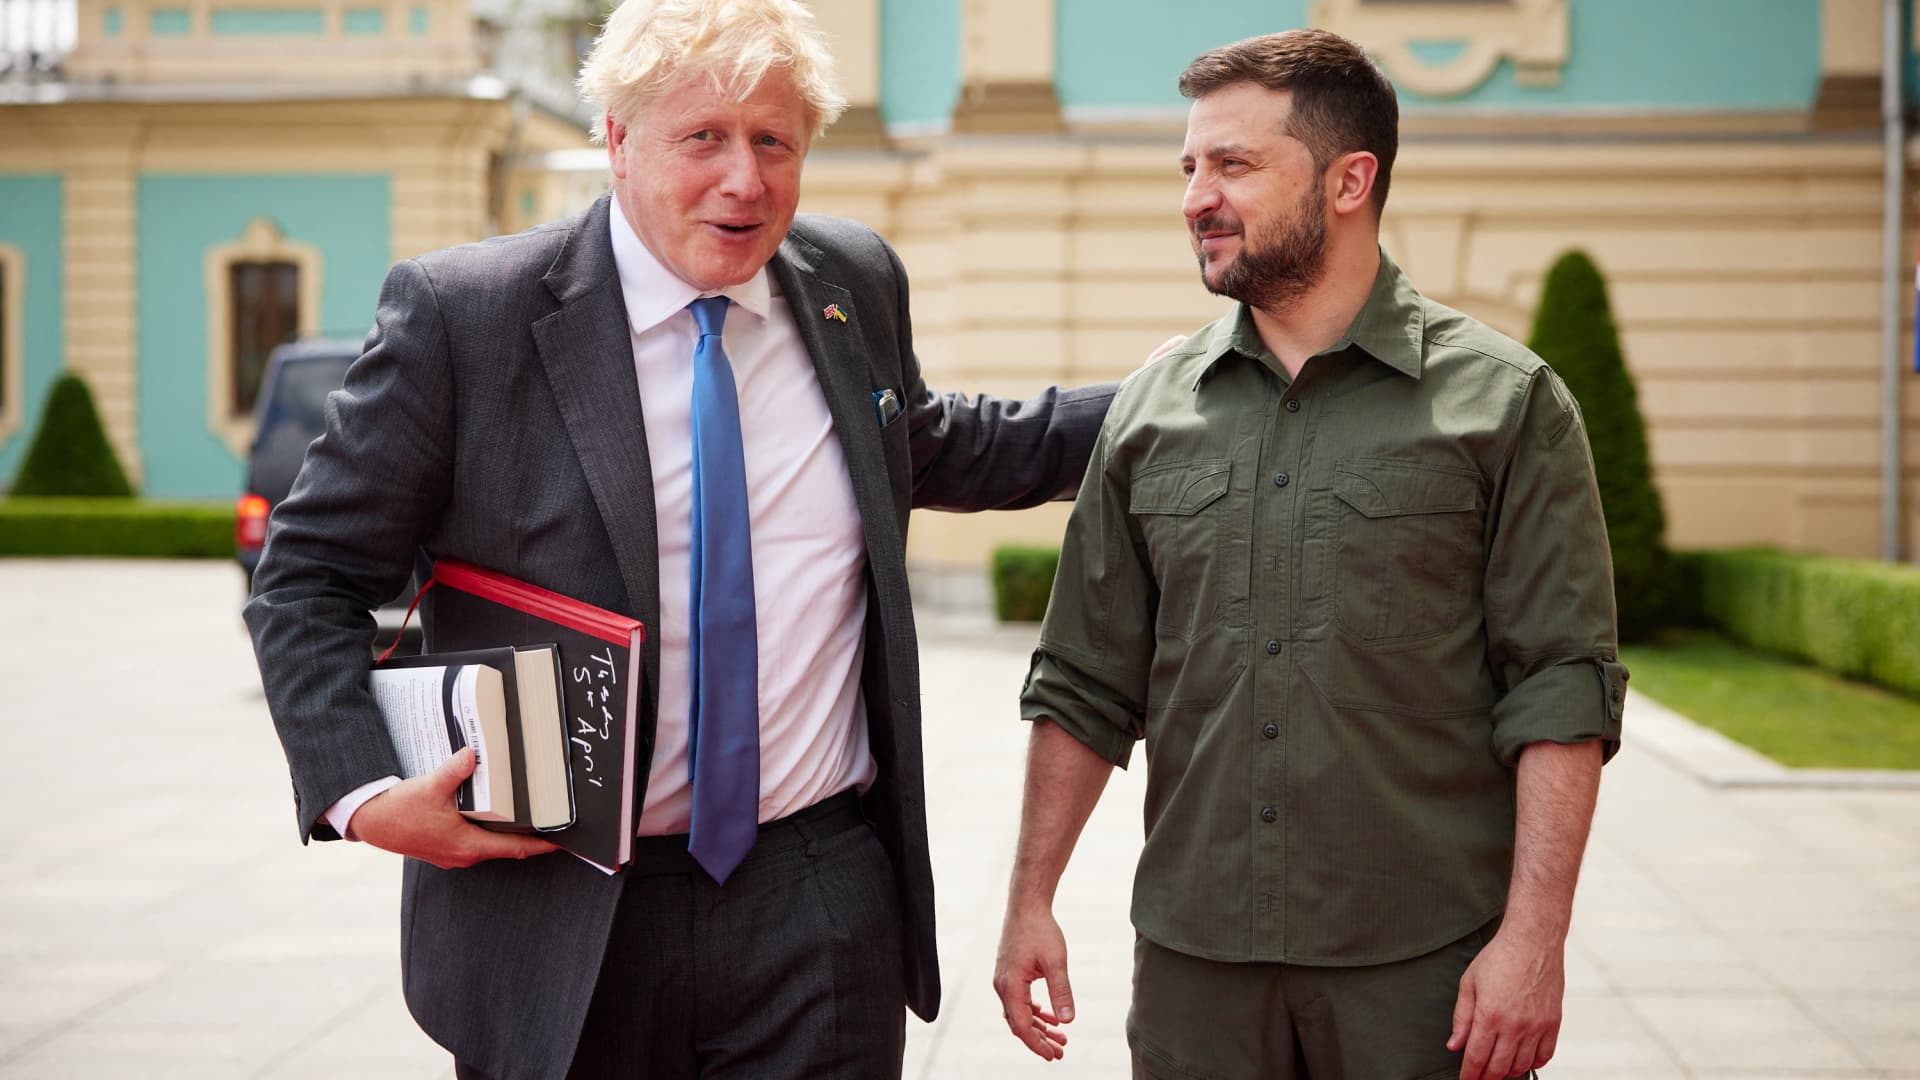 British PM Boris Johnson warns Russian takeover of Ukraine would be 'absolutely catastrophic' for the world